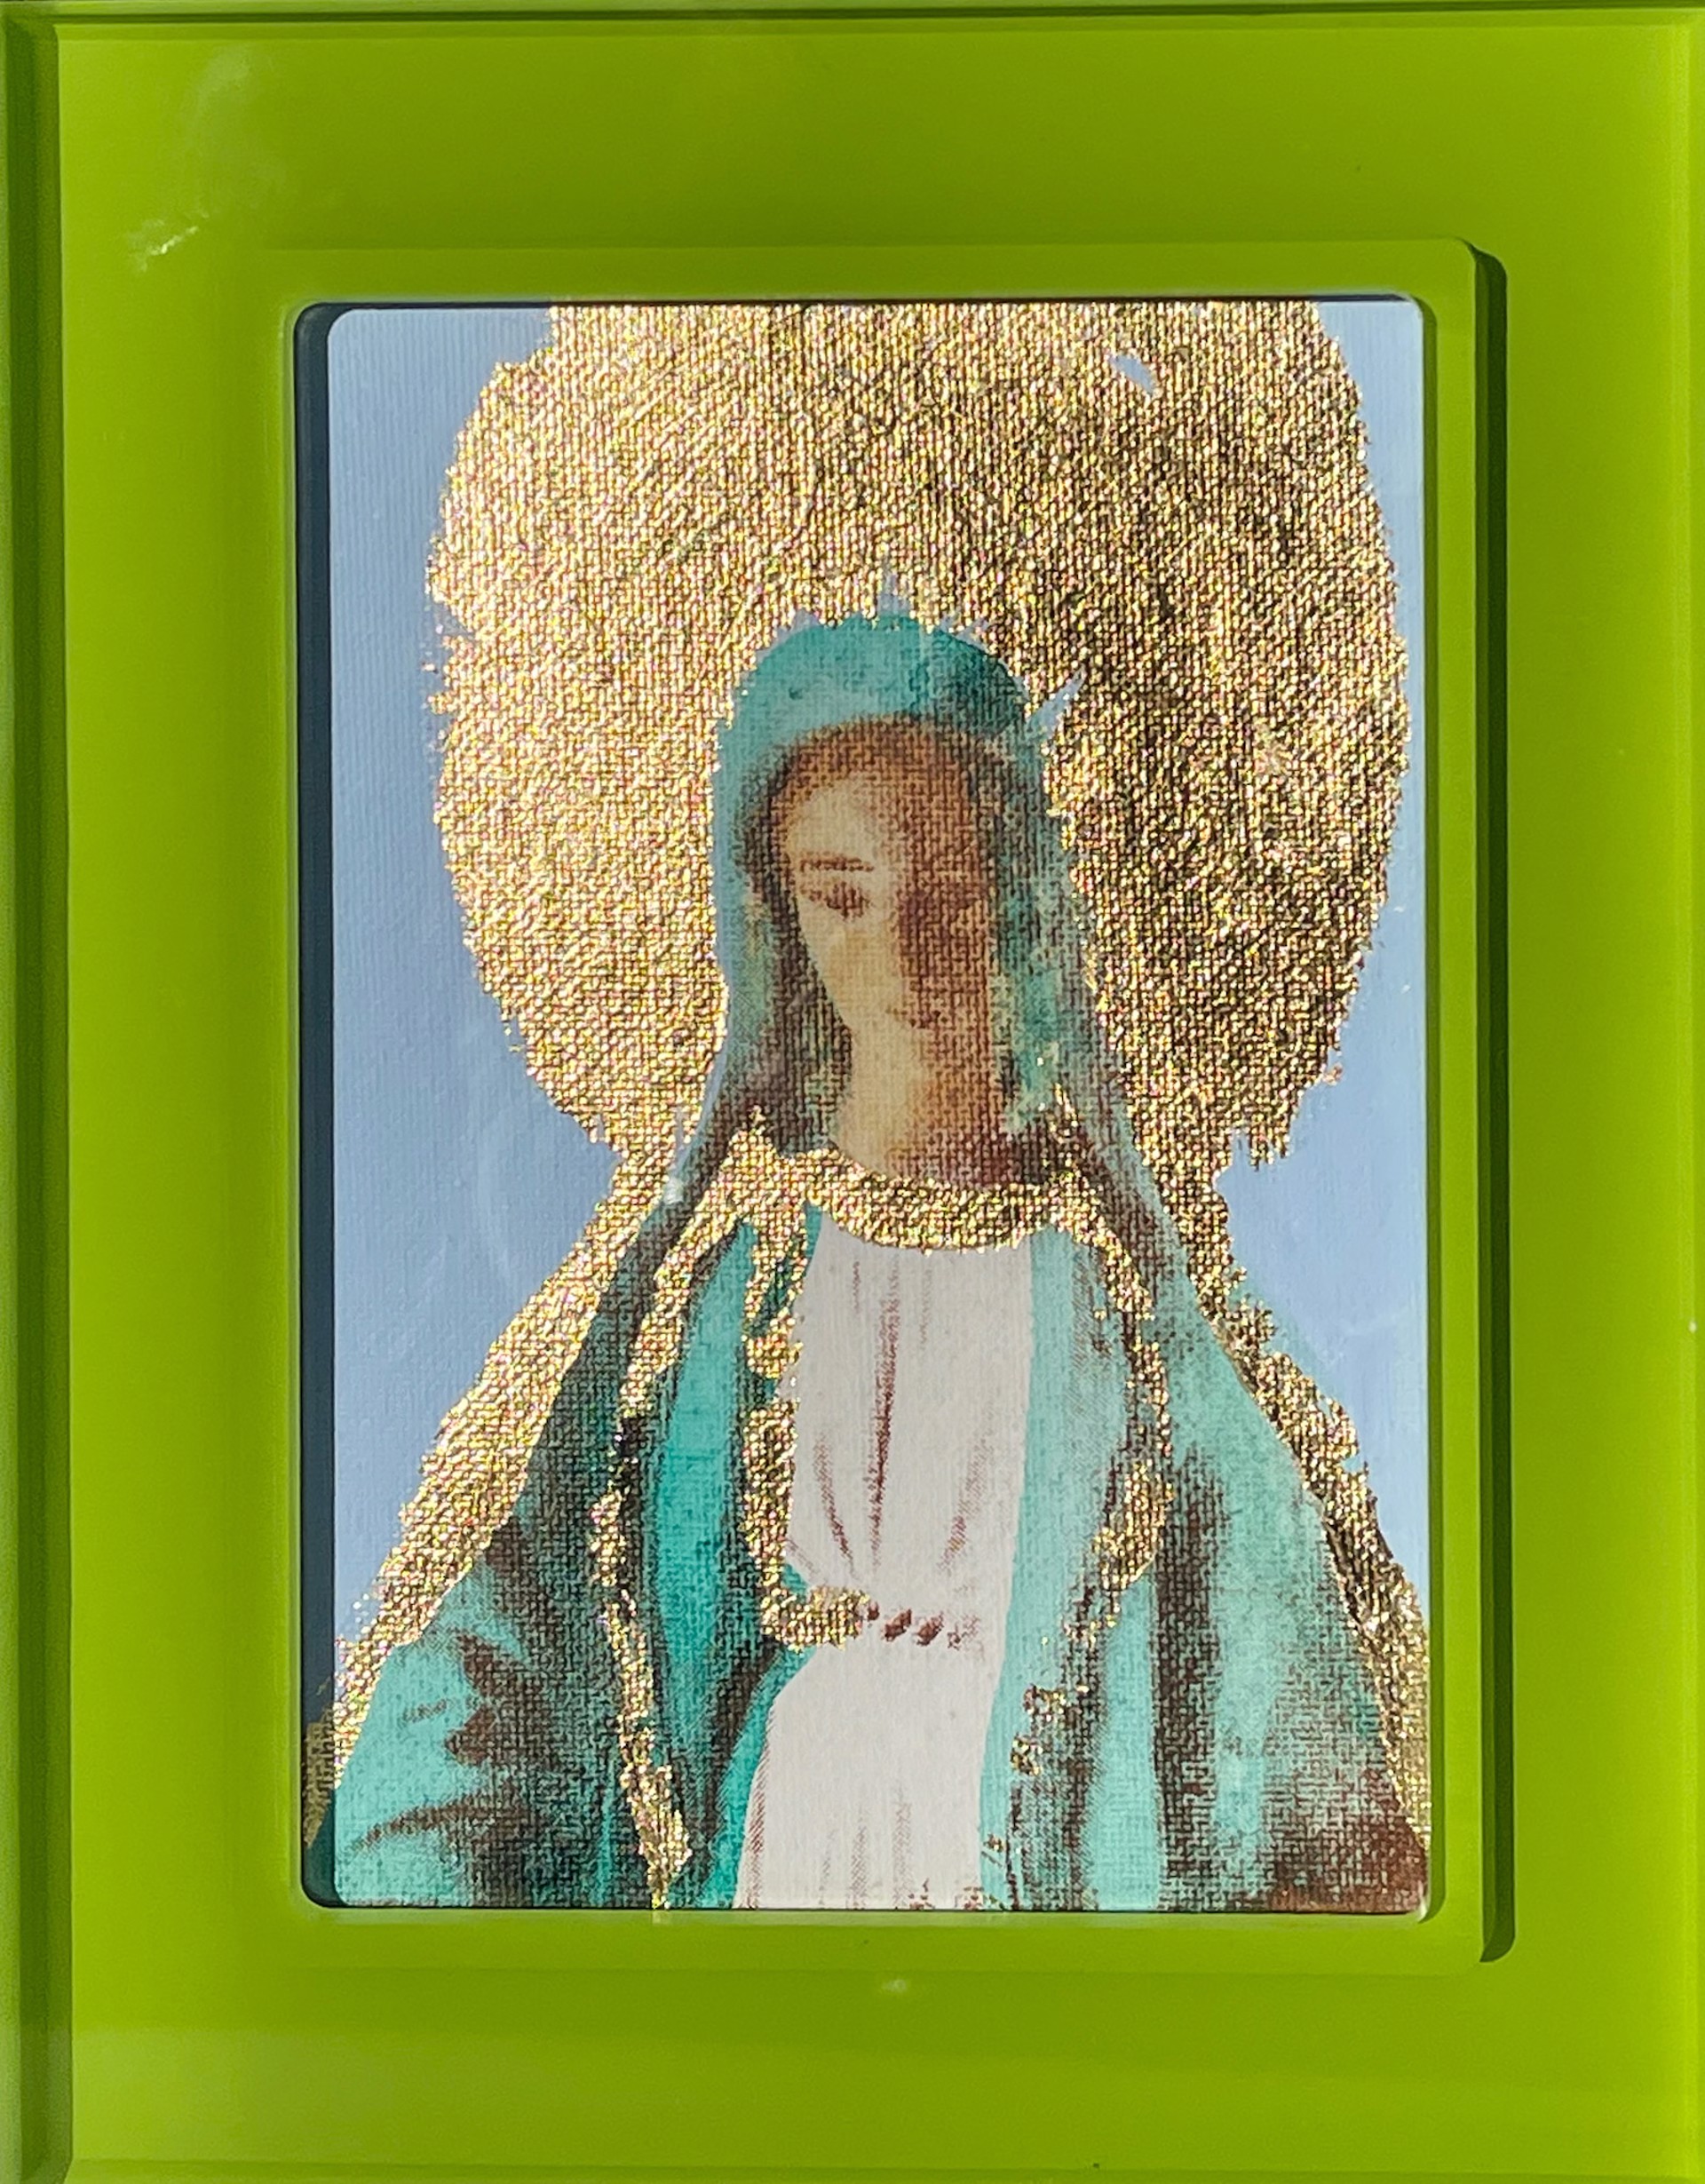 Hail Mary framed in Lilypad by Megan Coonelly